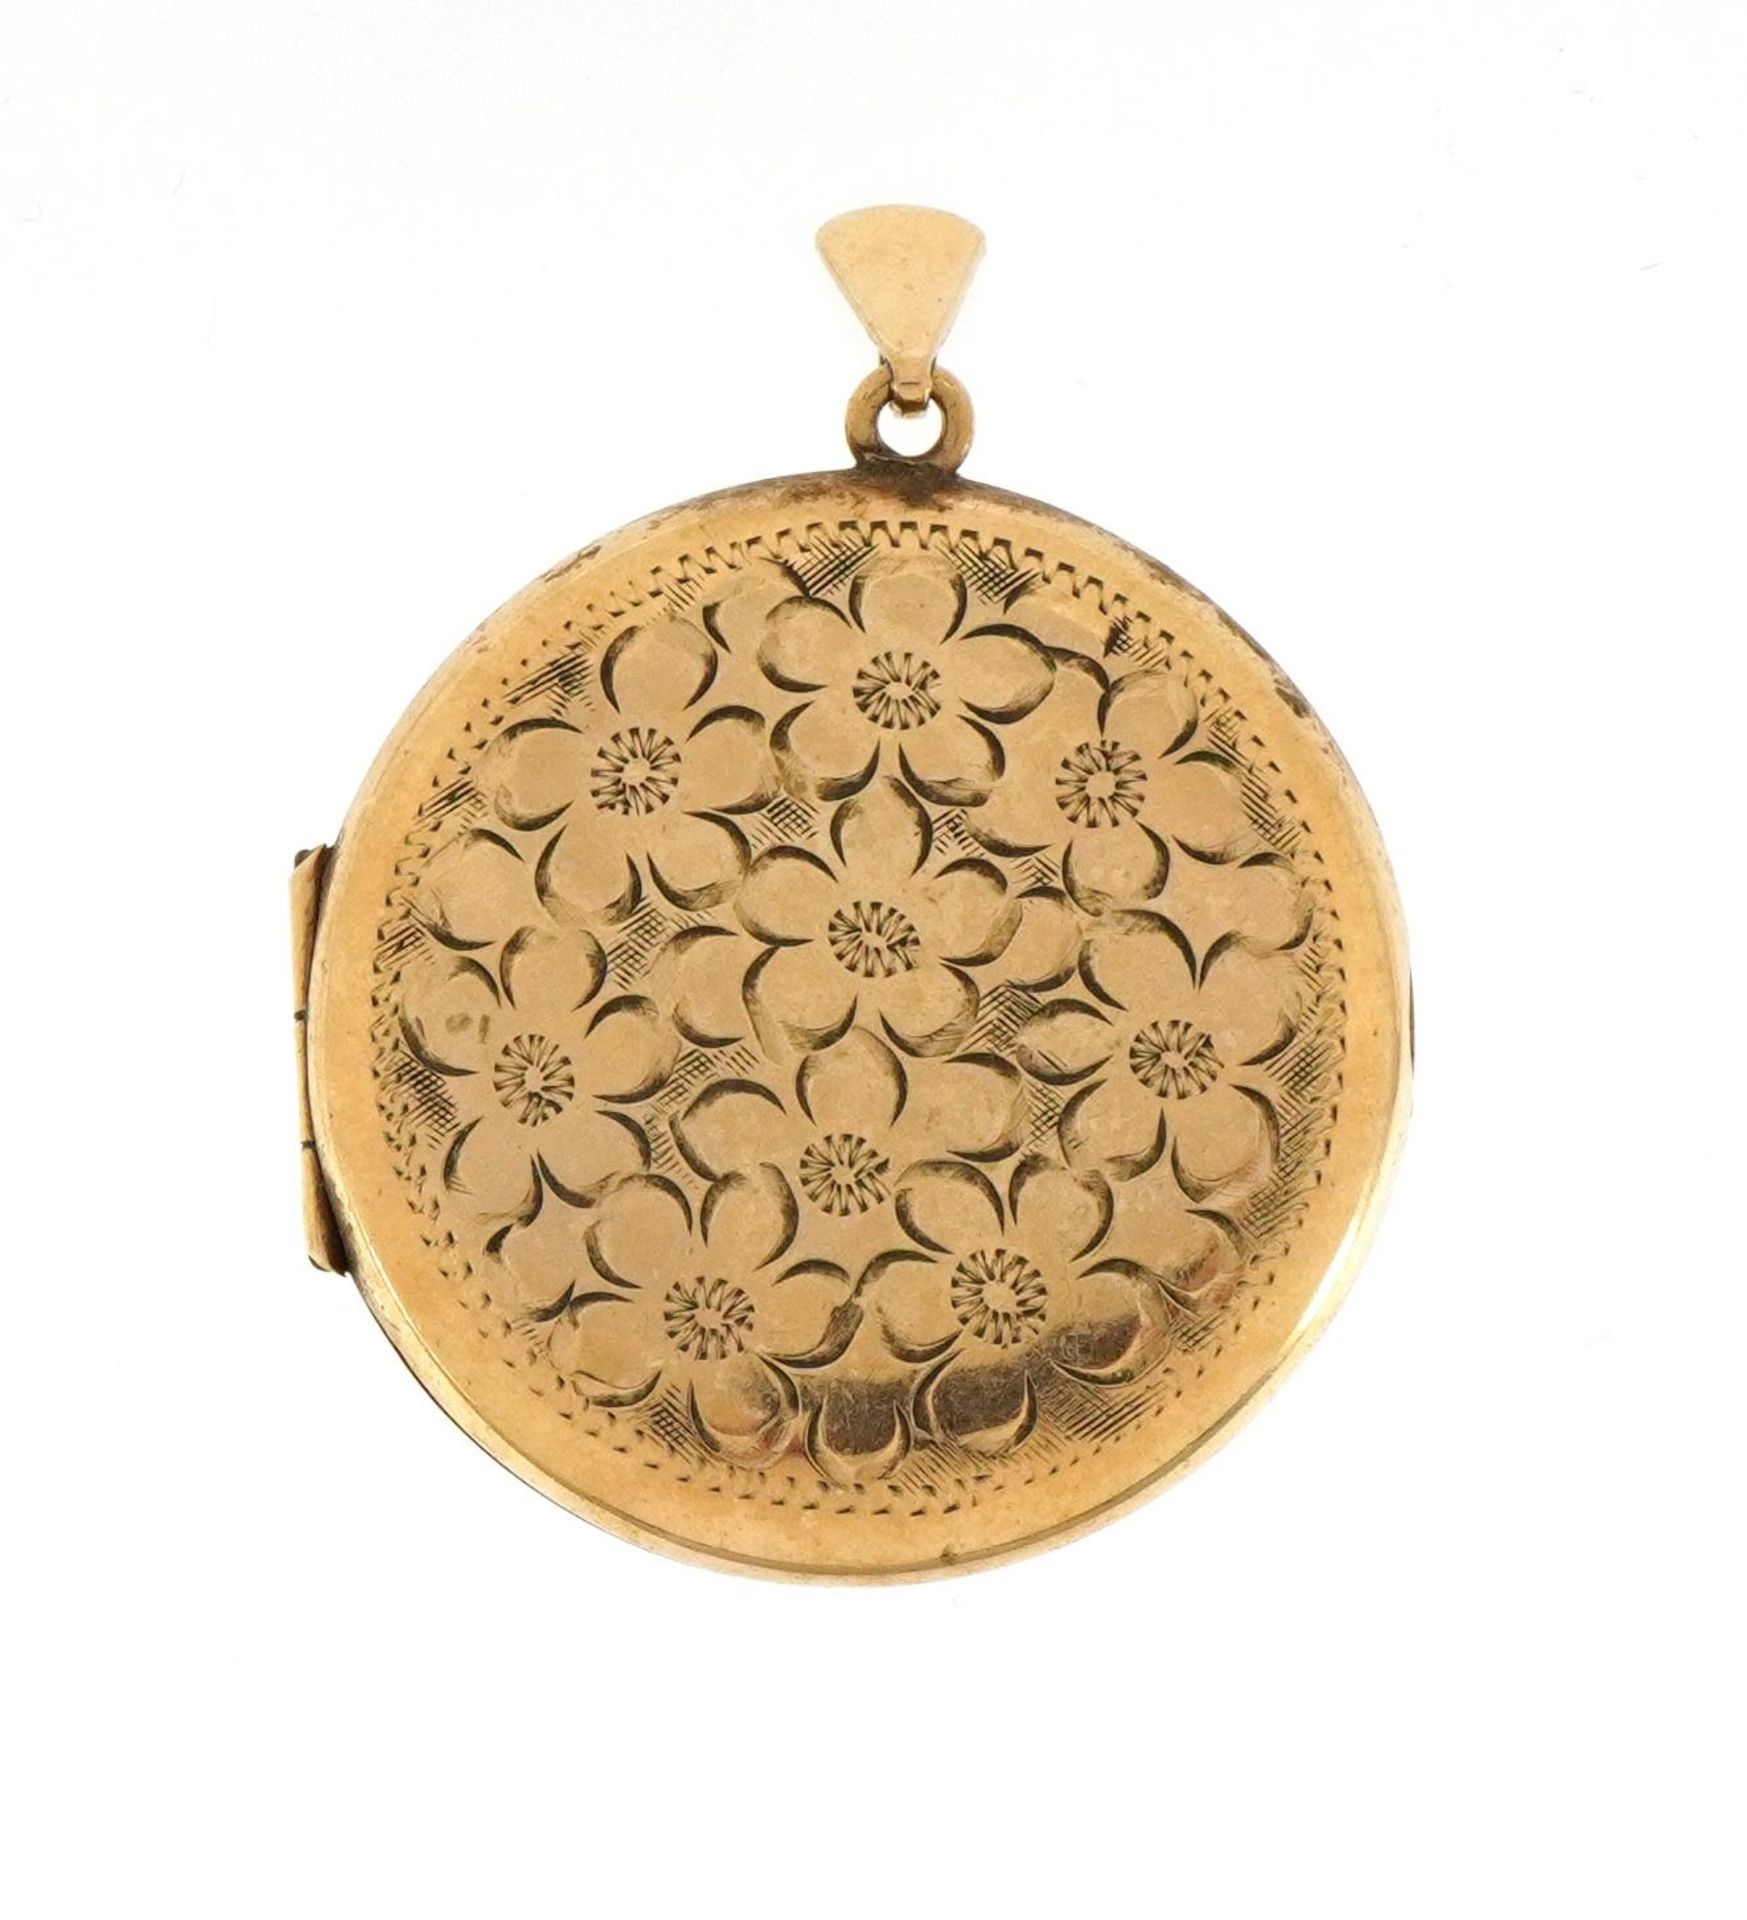 9ct gold circular locket with engraved floral decoration, 4.5cm high, 12.5g